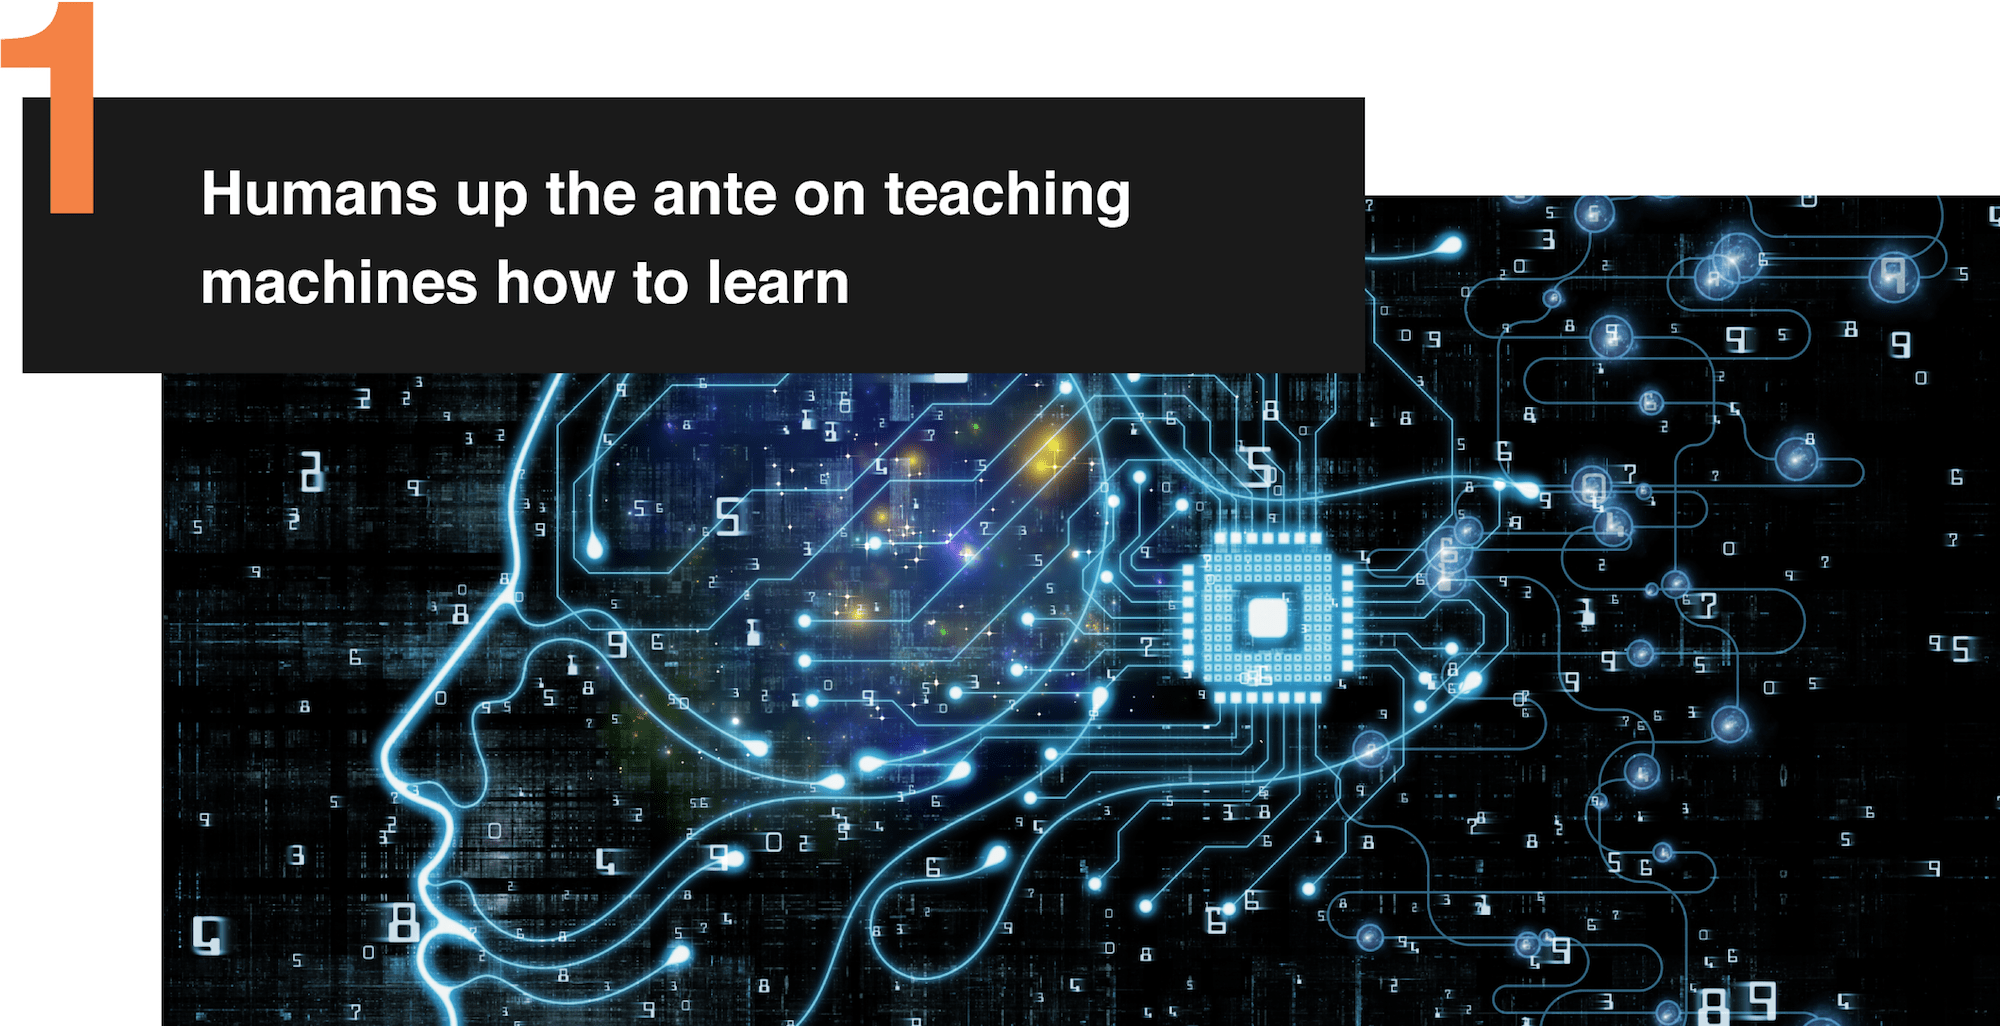 1. Humans up the ante on teaching machines how to learn